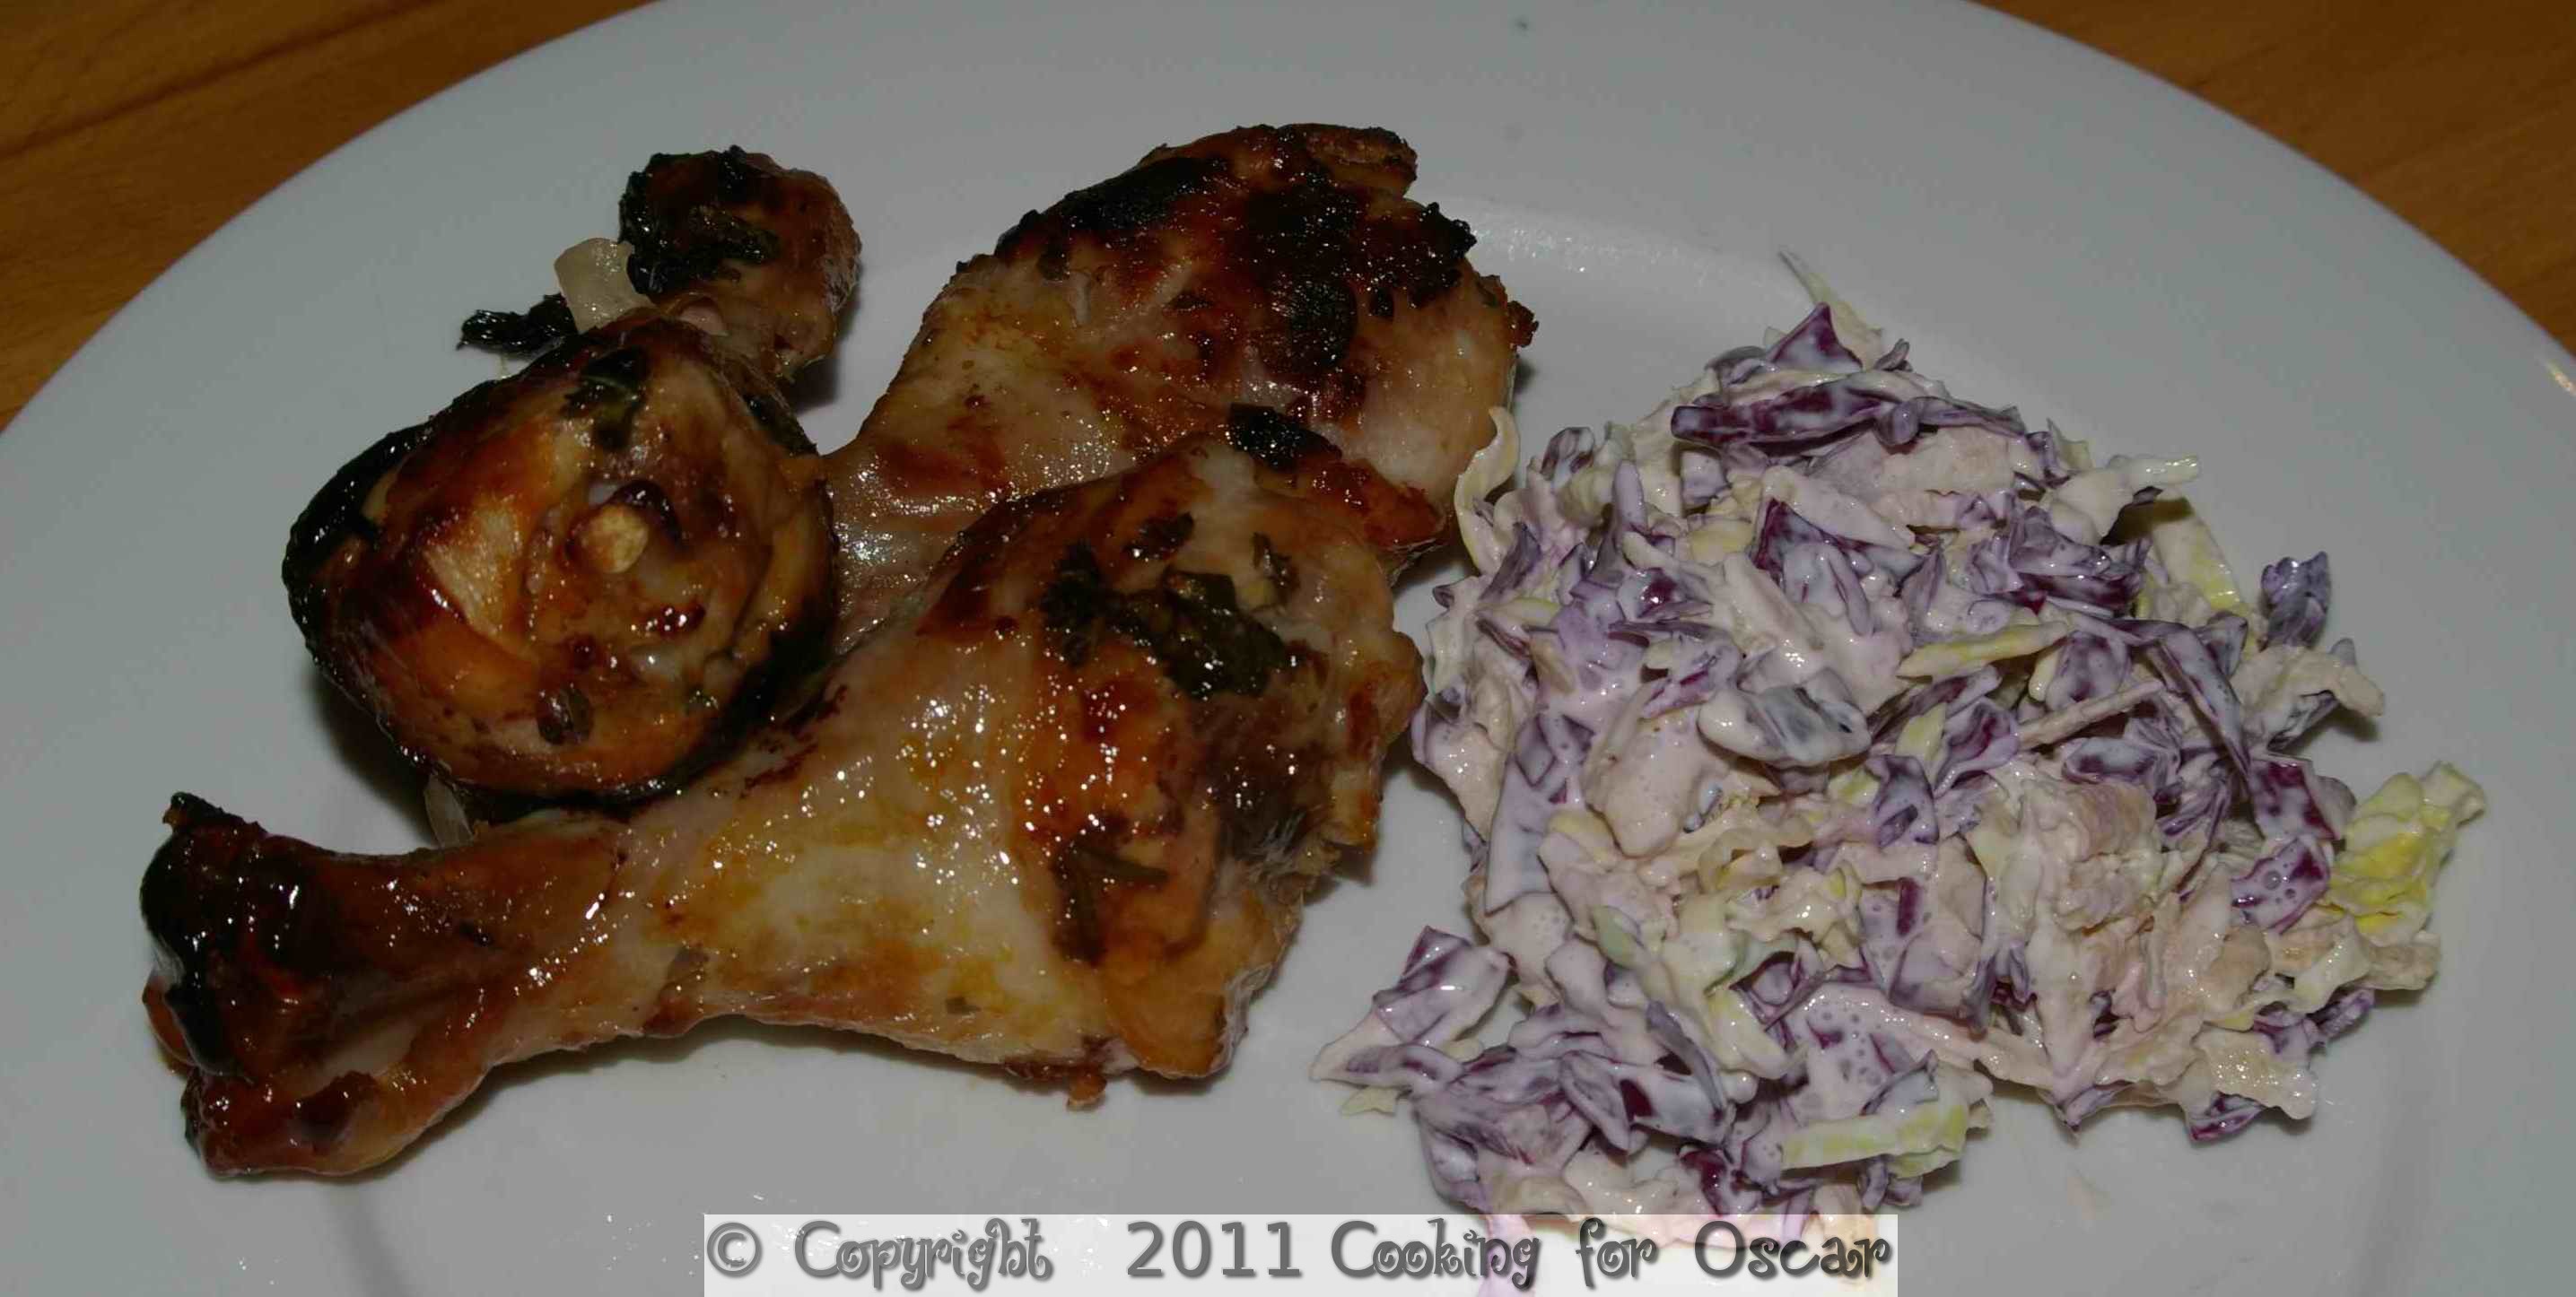 Golden Drumsticks and Apple and Sour Cream Coleslaw